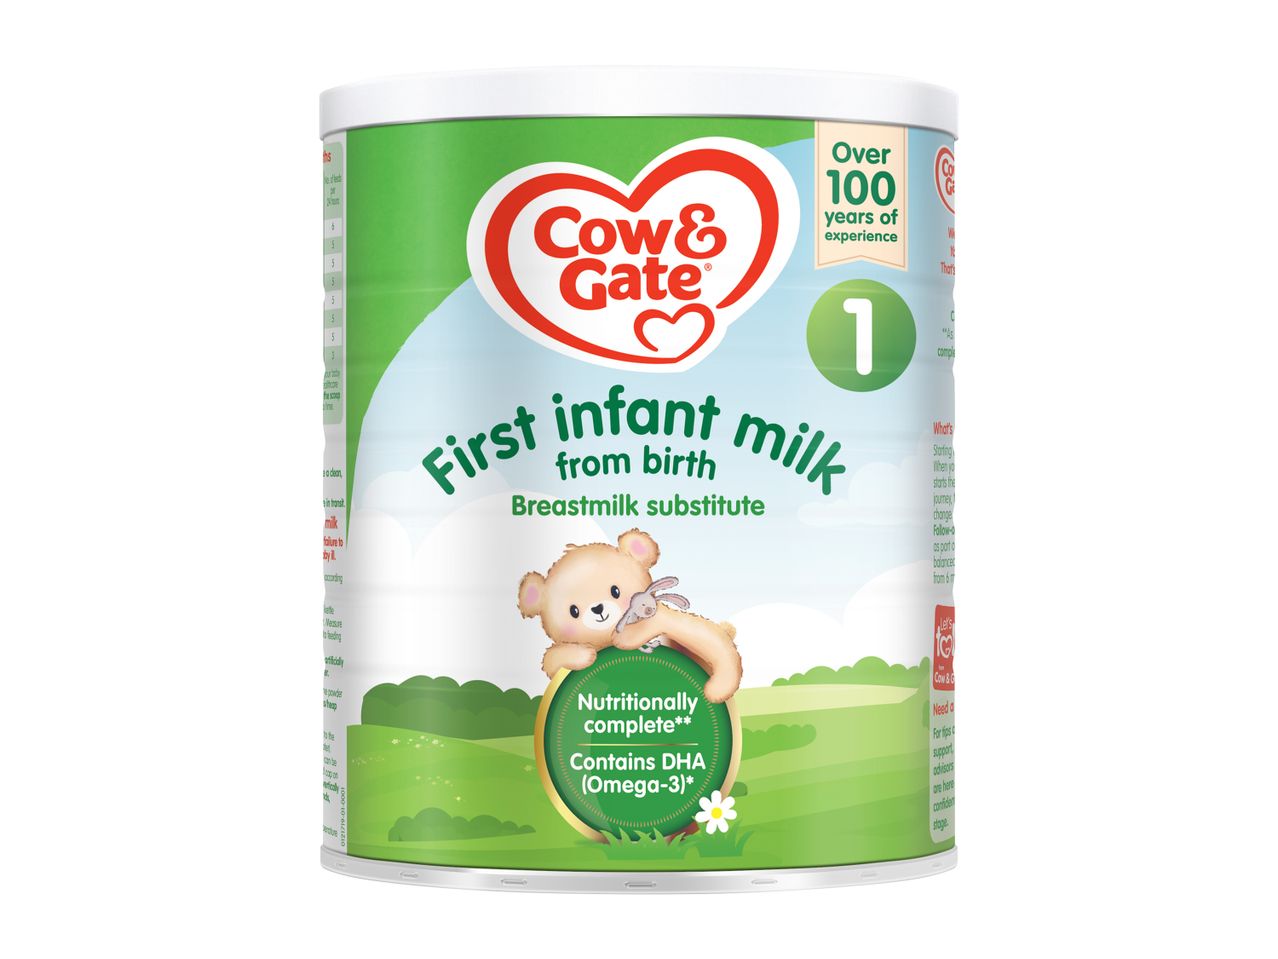 Go to full screen view: Cow & Gate First Infant Milk - Image 1